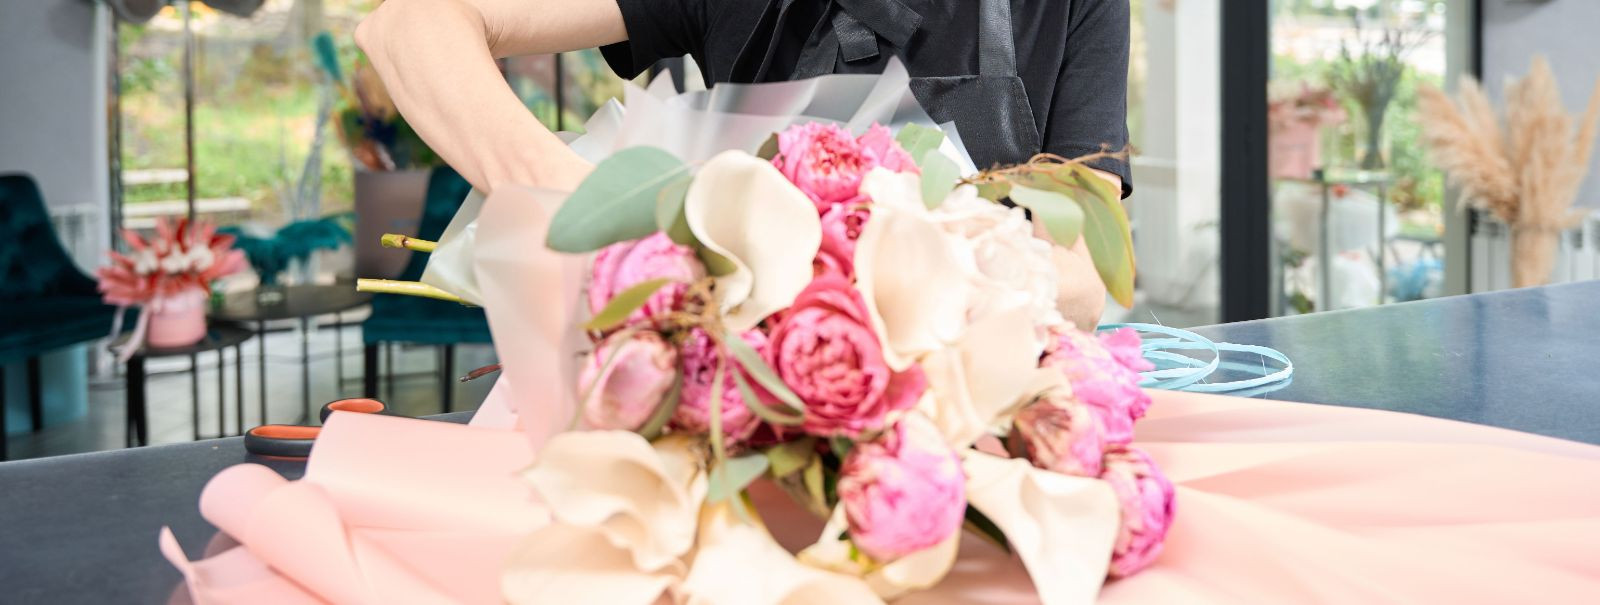 Welcome to the world of LUCKYFLÖR OÜ, where every petal tells a story and every bouquet is a masterpiece. Our mission is simple yet profound: We craft exquisite